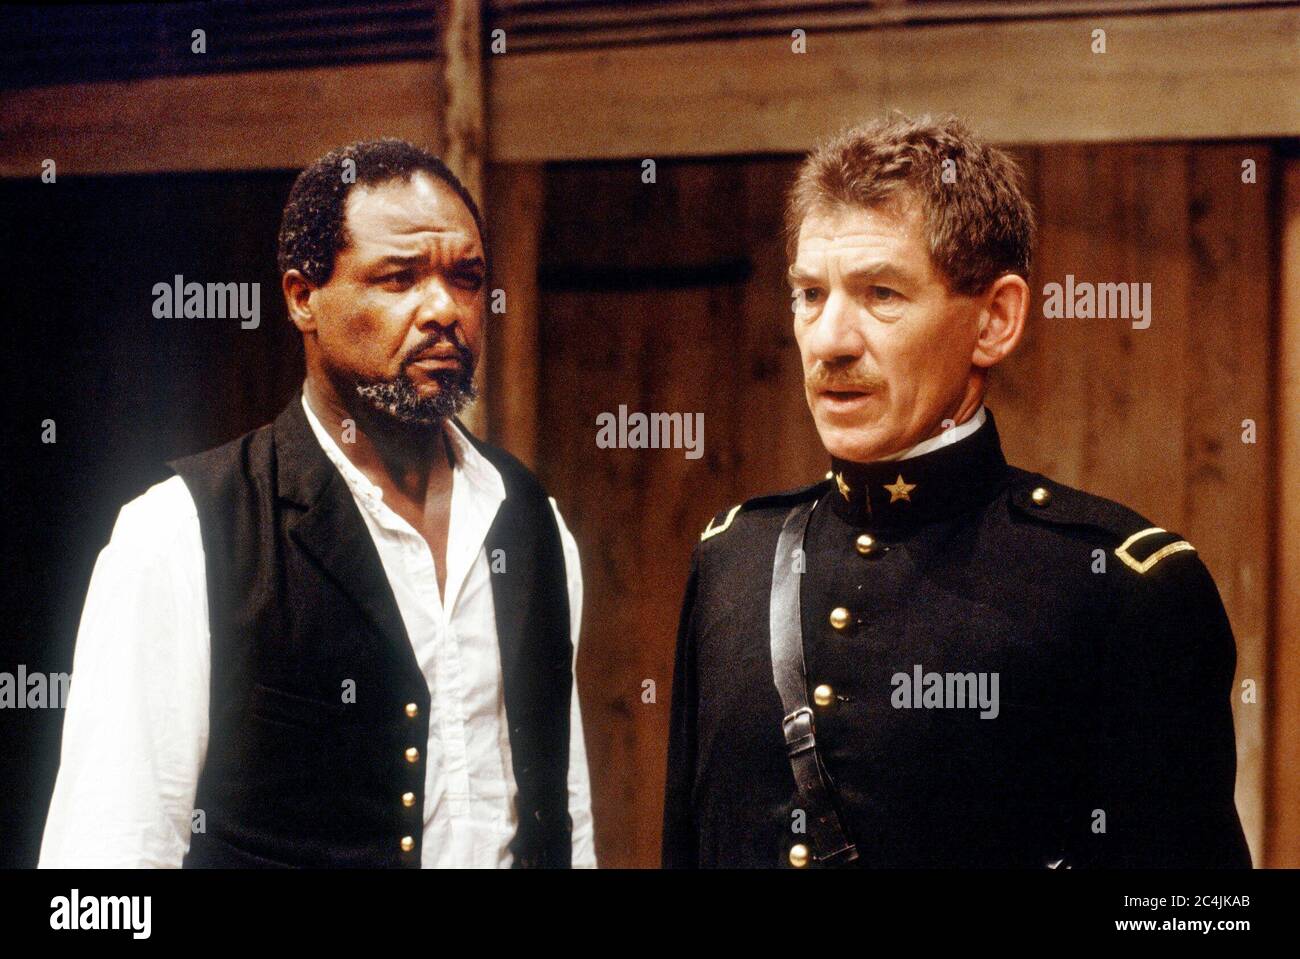 l-r: Willard White (Othello), Ian McKellen (Iago) in OTHELLO by Shakespeare at the Royal Shakespeare Company (RSC), The Other Place, Stratford-upon-Avon 24/08/1989  music: Guy Woolfenden  design: Bob Crowley lighting: Chris Parry fights: Malcolm Ranson  director: Trevor Nunn Stock Photo